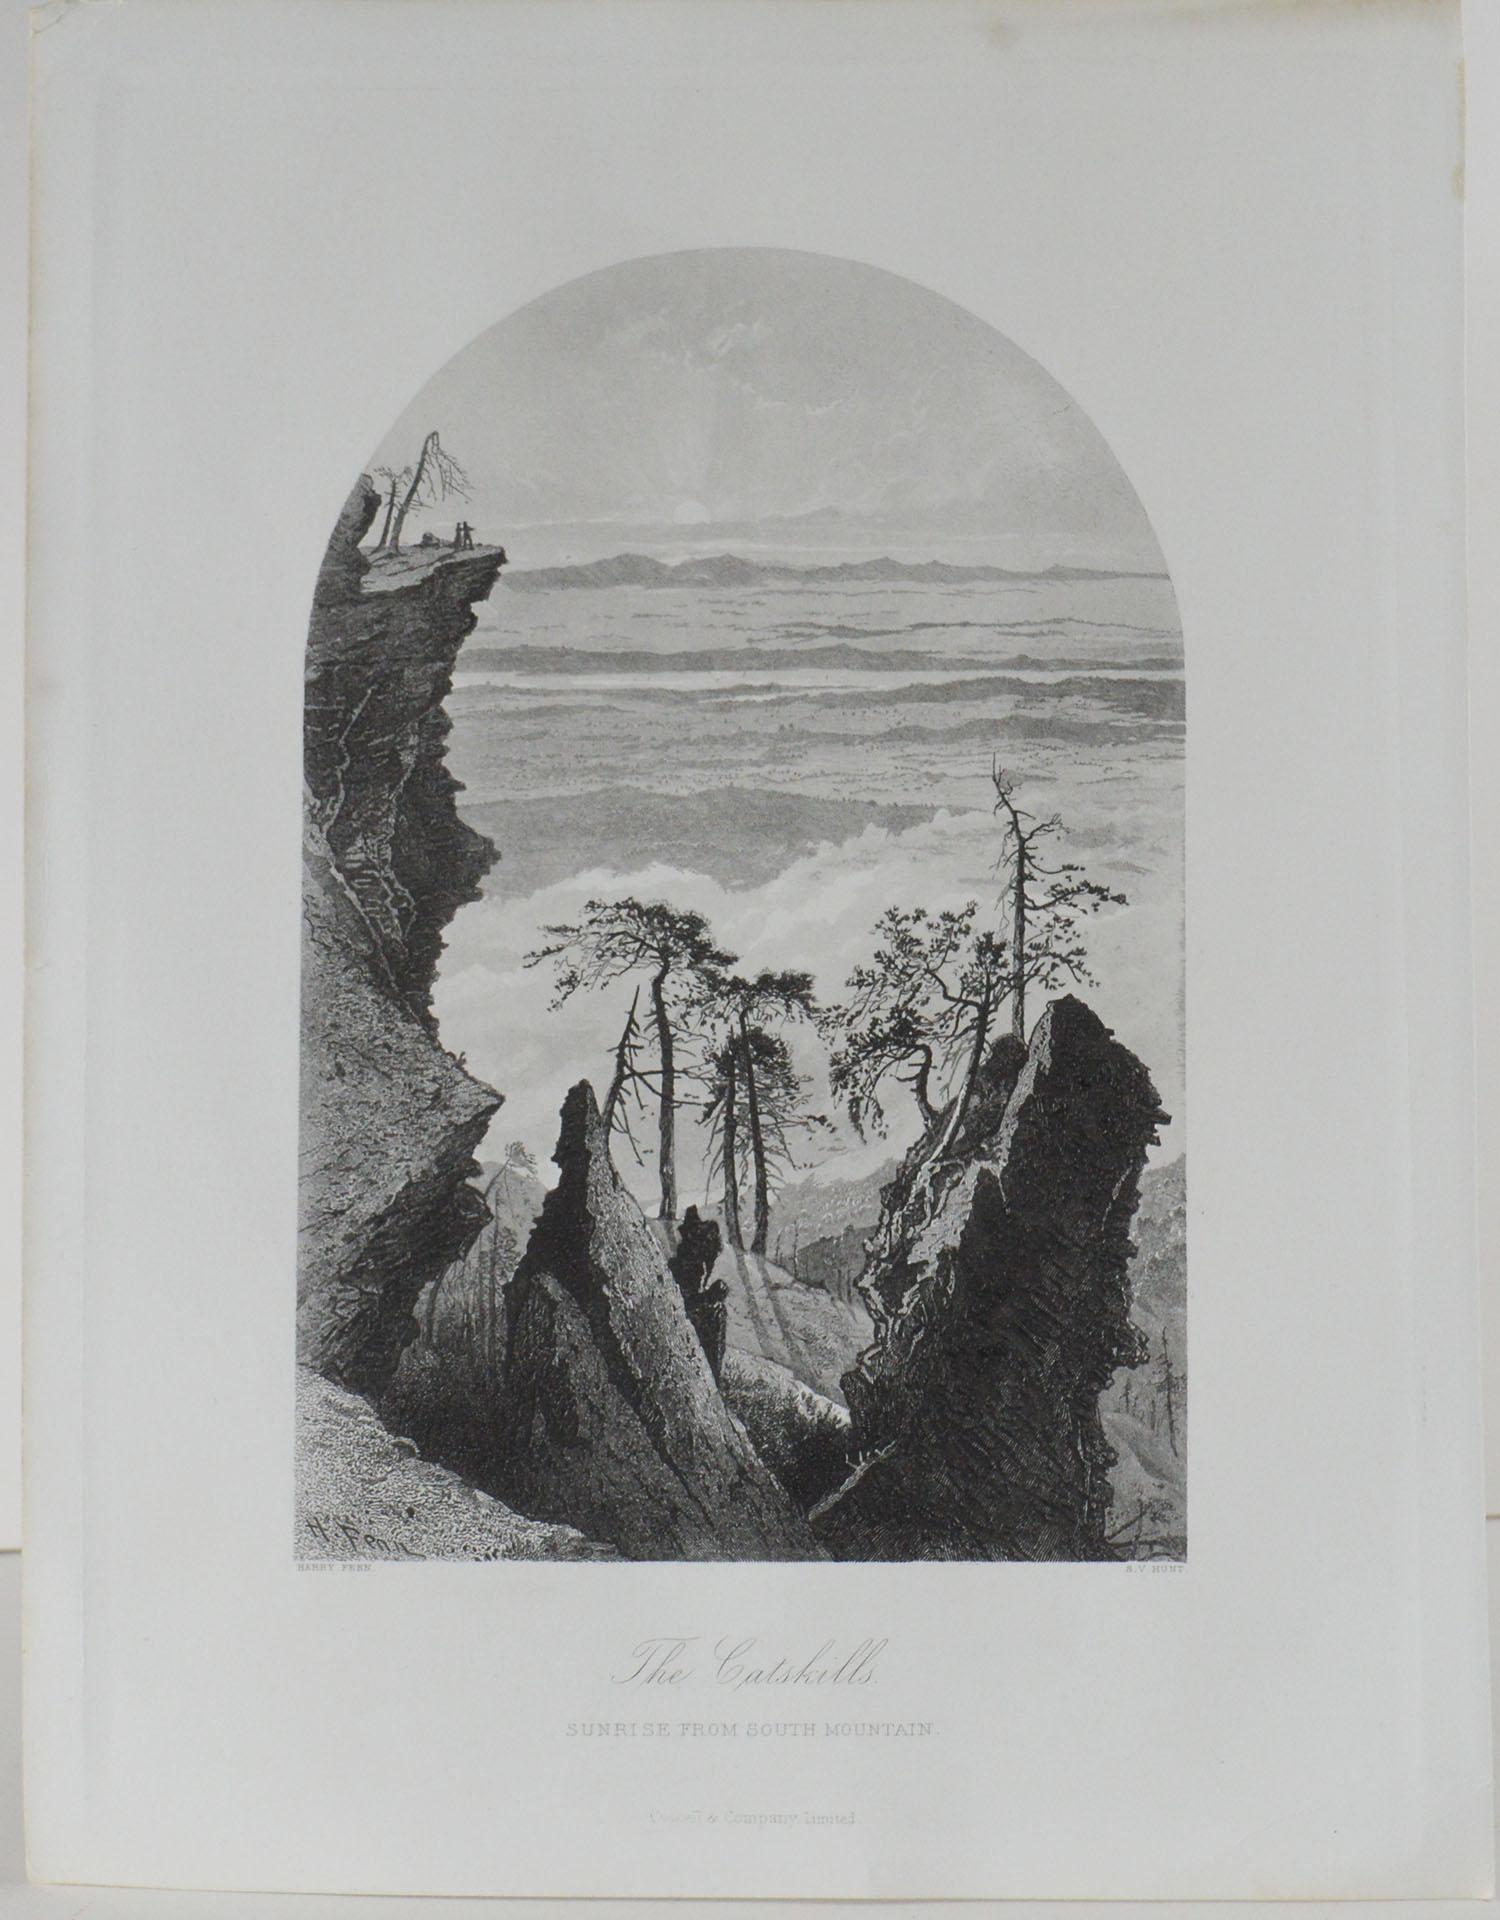 Great print of the Catskills, New York

Steel engraving after the original drawing by H.Fenn

Published circa 1870

Unframed.
  